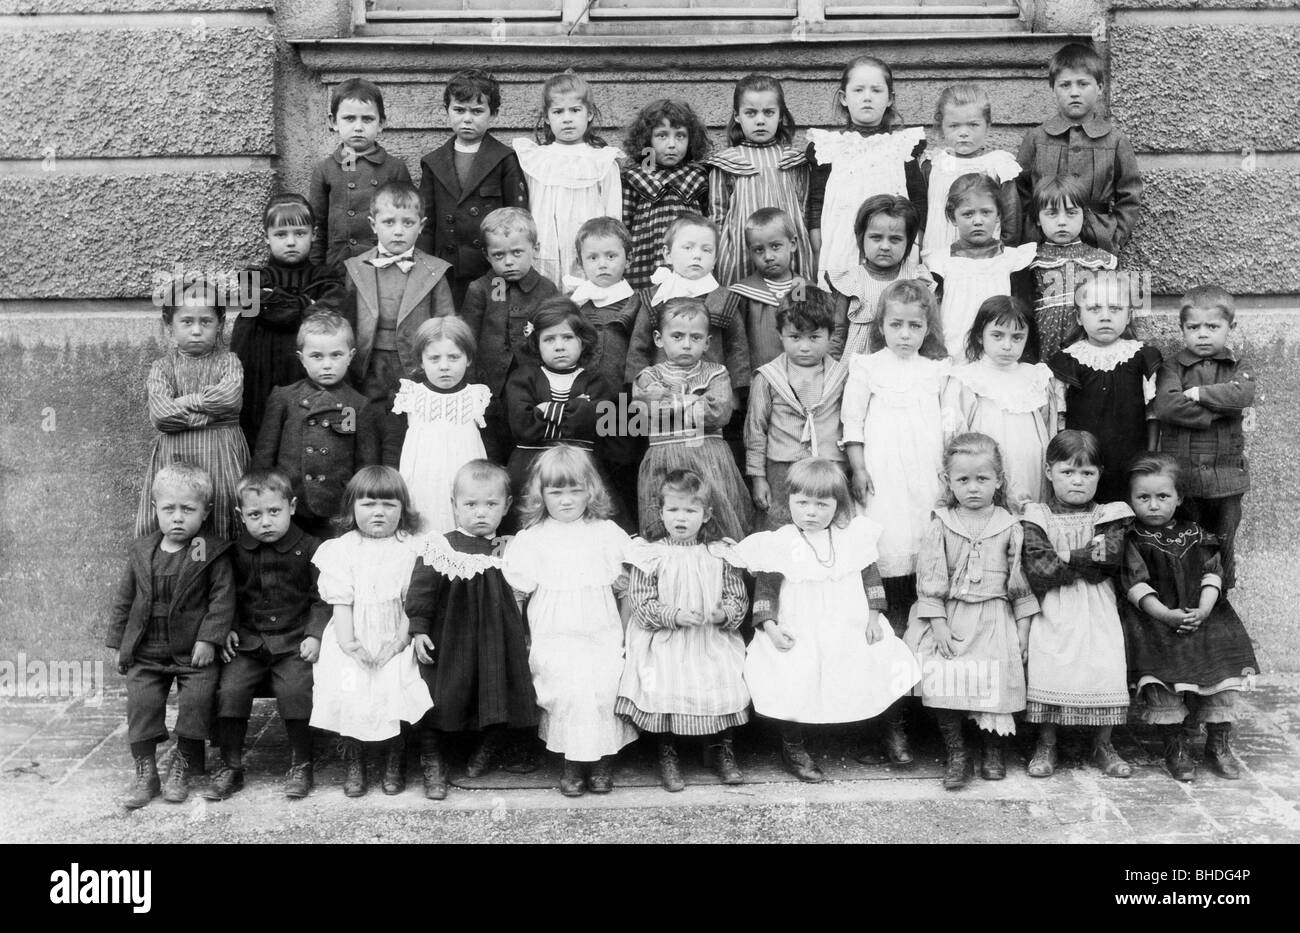 people, children, infants (up to 5 years), group picture, circa 1900, Stock Photo